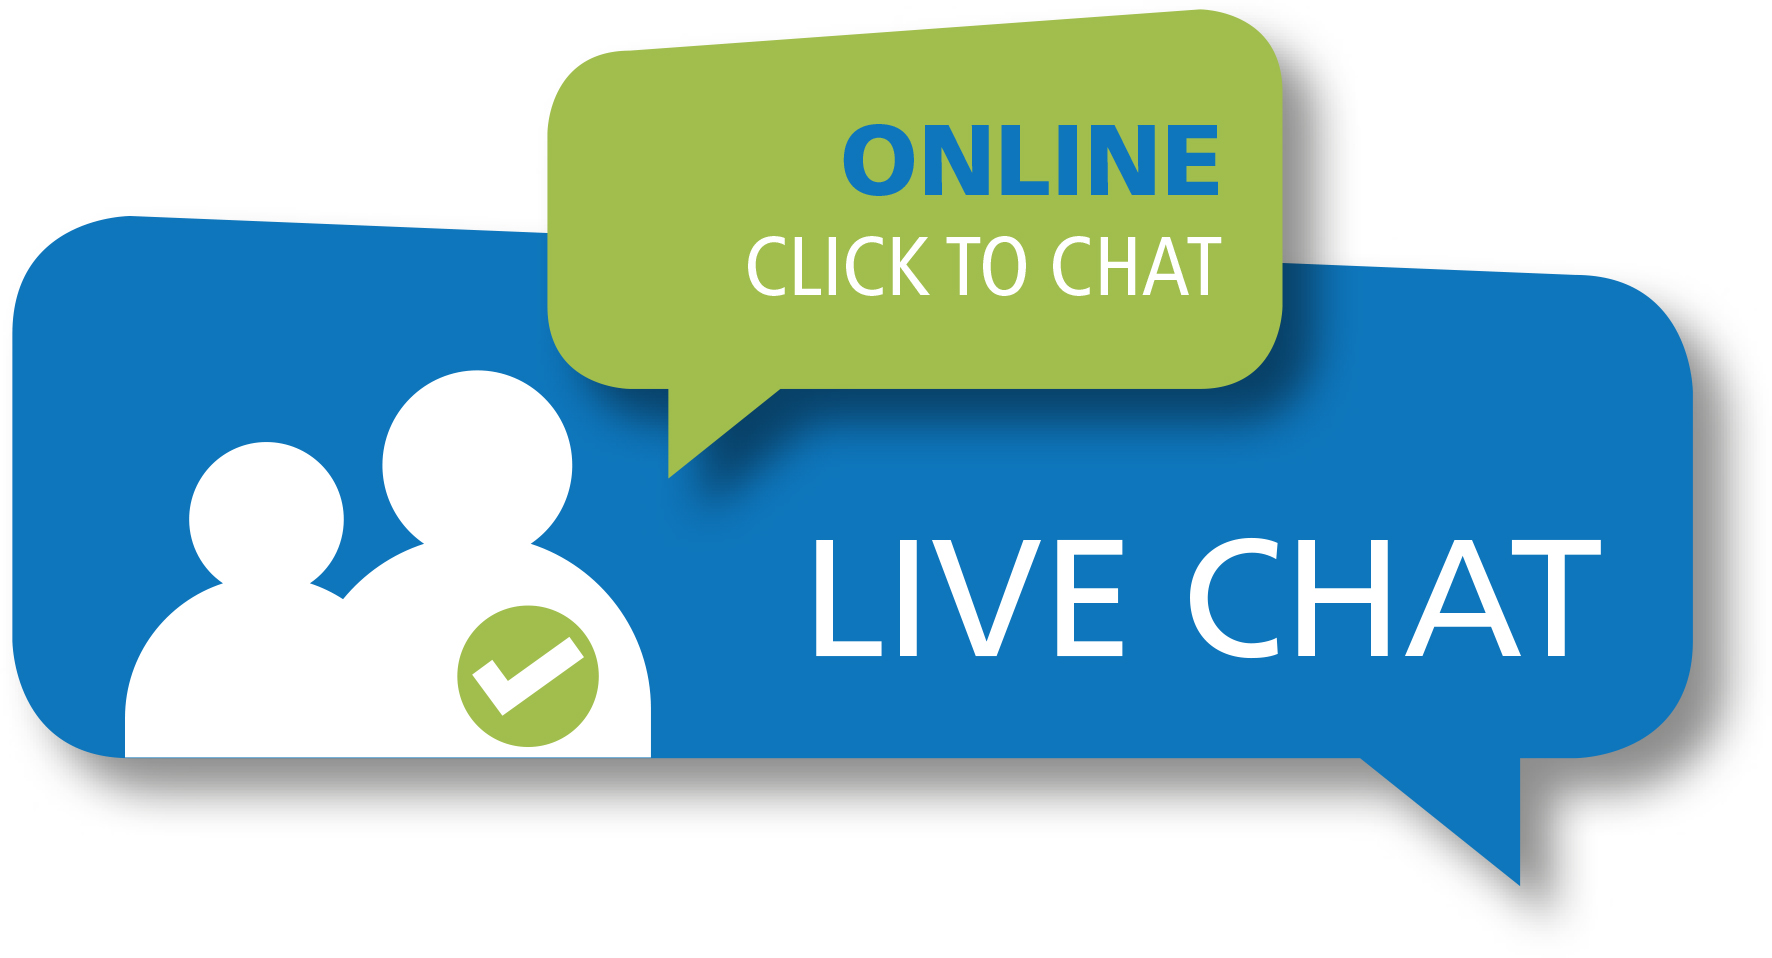 Onli chat Live Chat